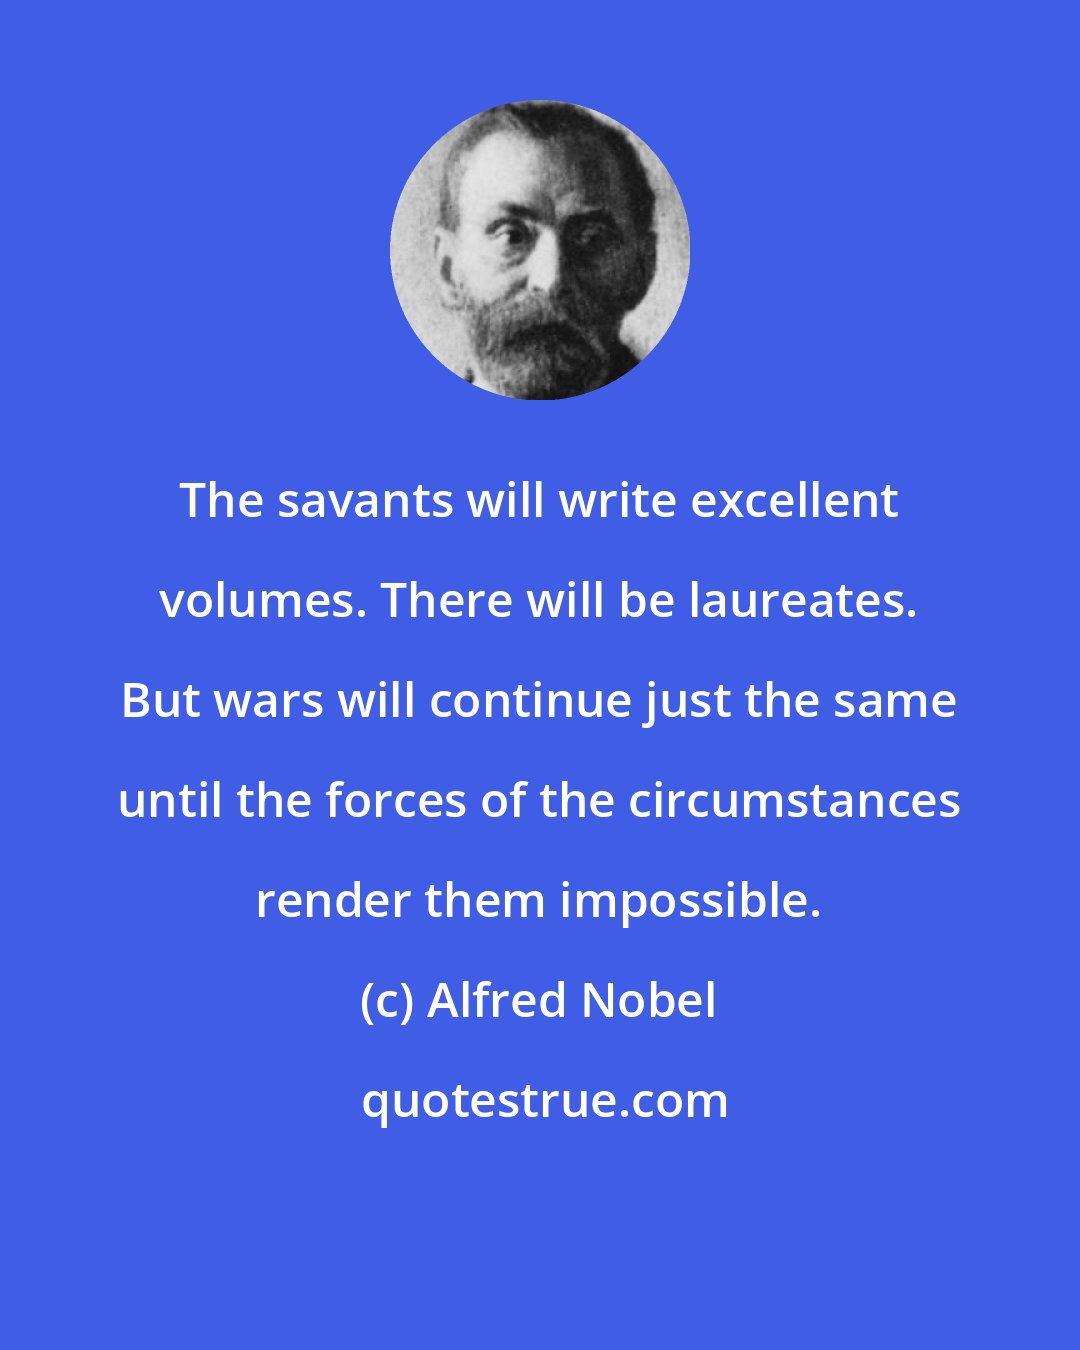 Alfred Nobel: The savants will write excellent volumes. There will be laureates. But wars will continue just the same until the forces of the circumstances render them impossible.